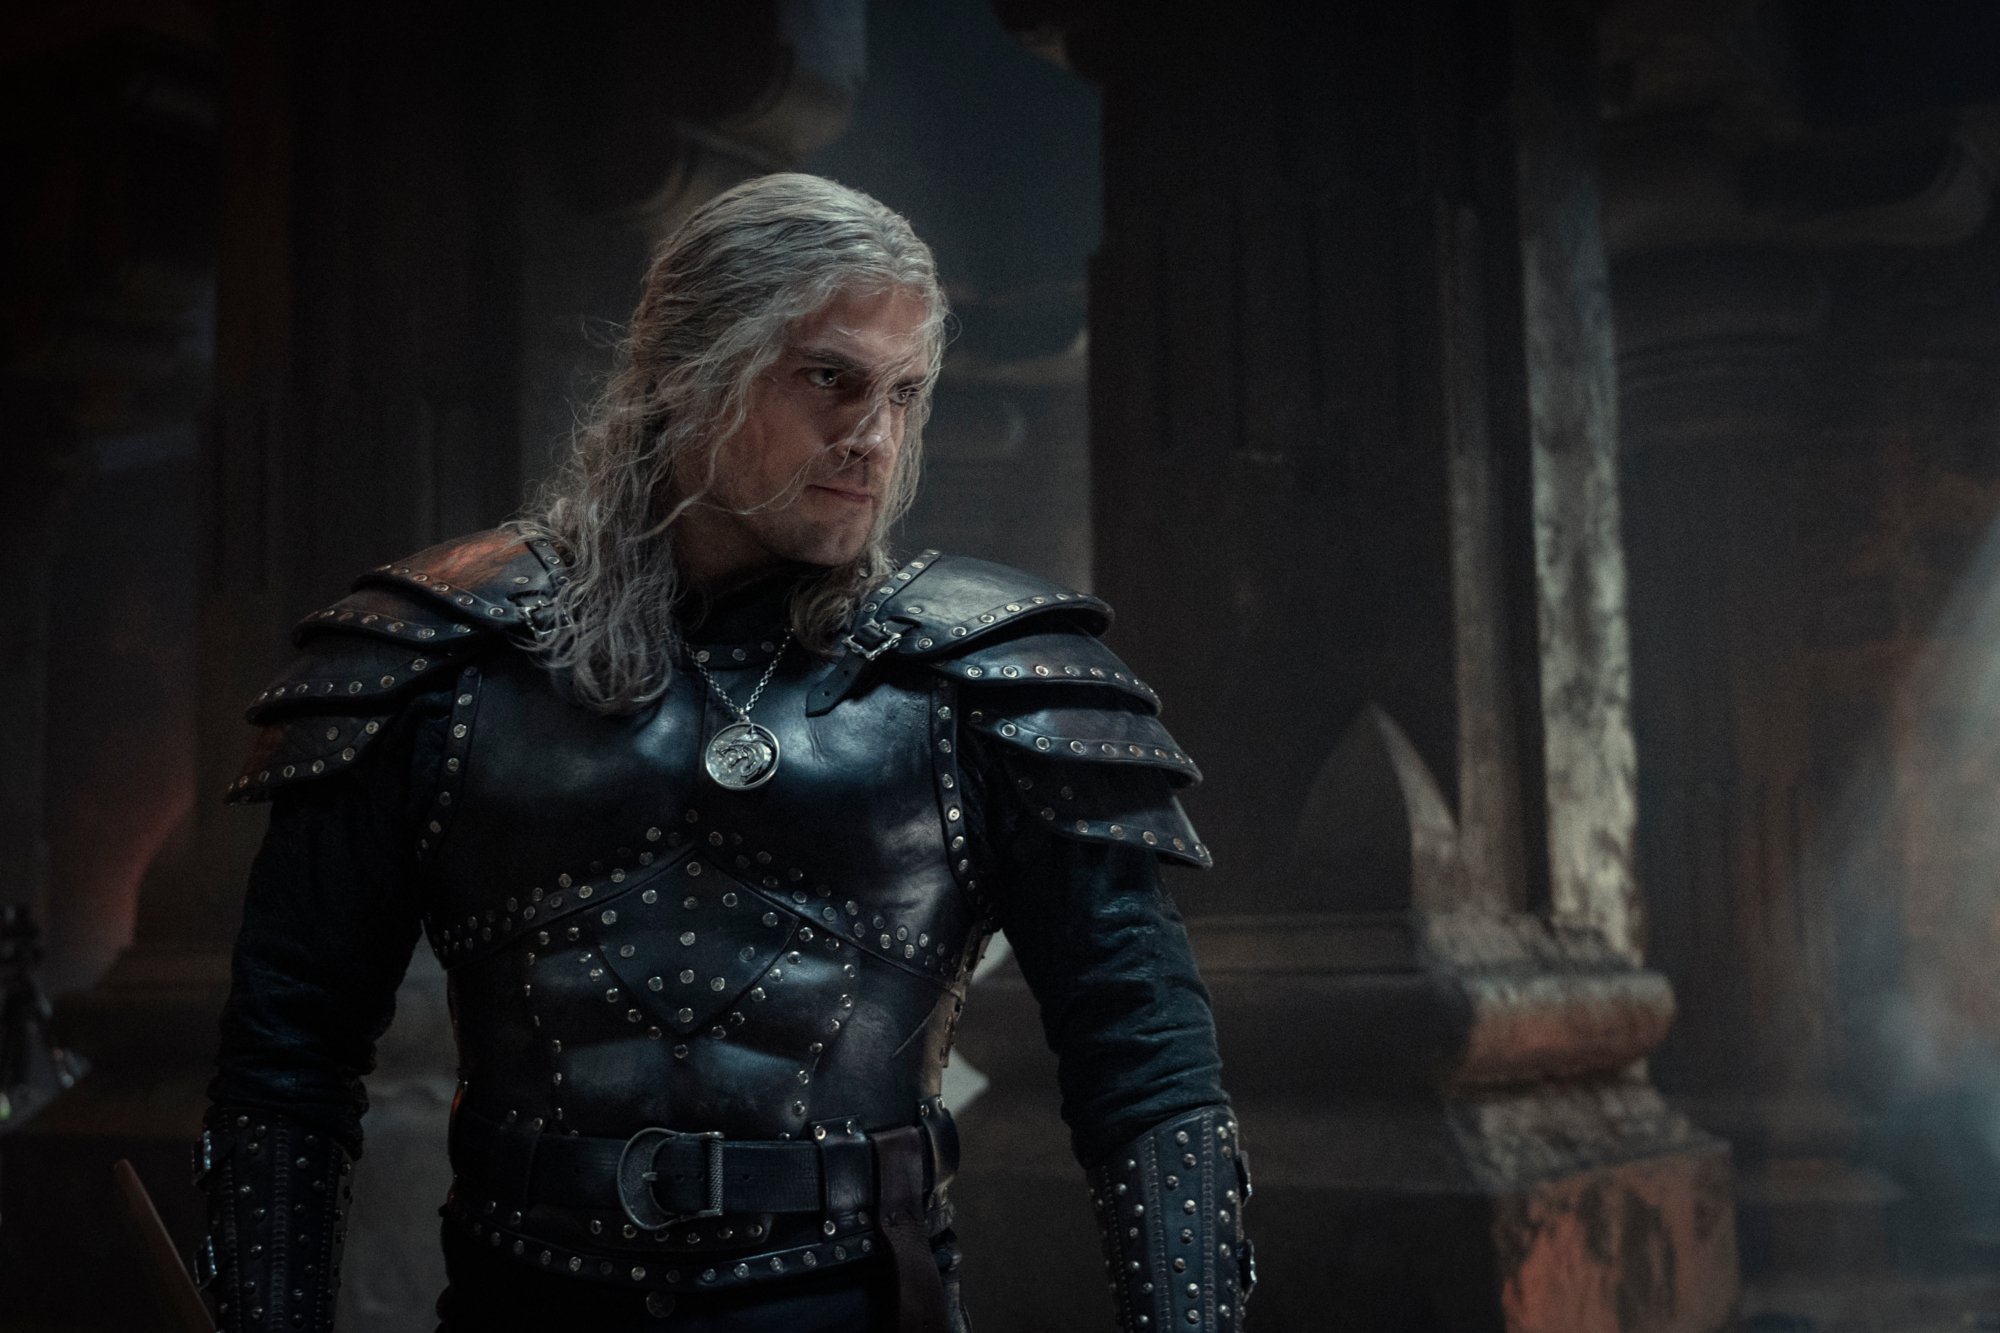 Henry Cavill as Geralt of Rivia in 'The Witcher' Season 2. He's wearing black armor and looks ready to fight.